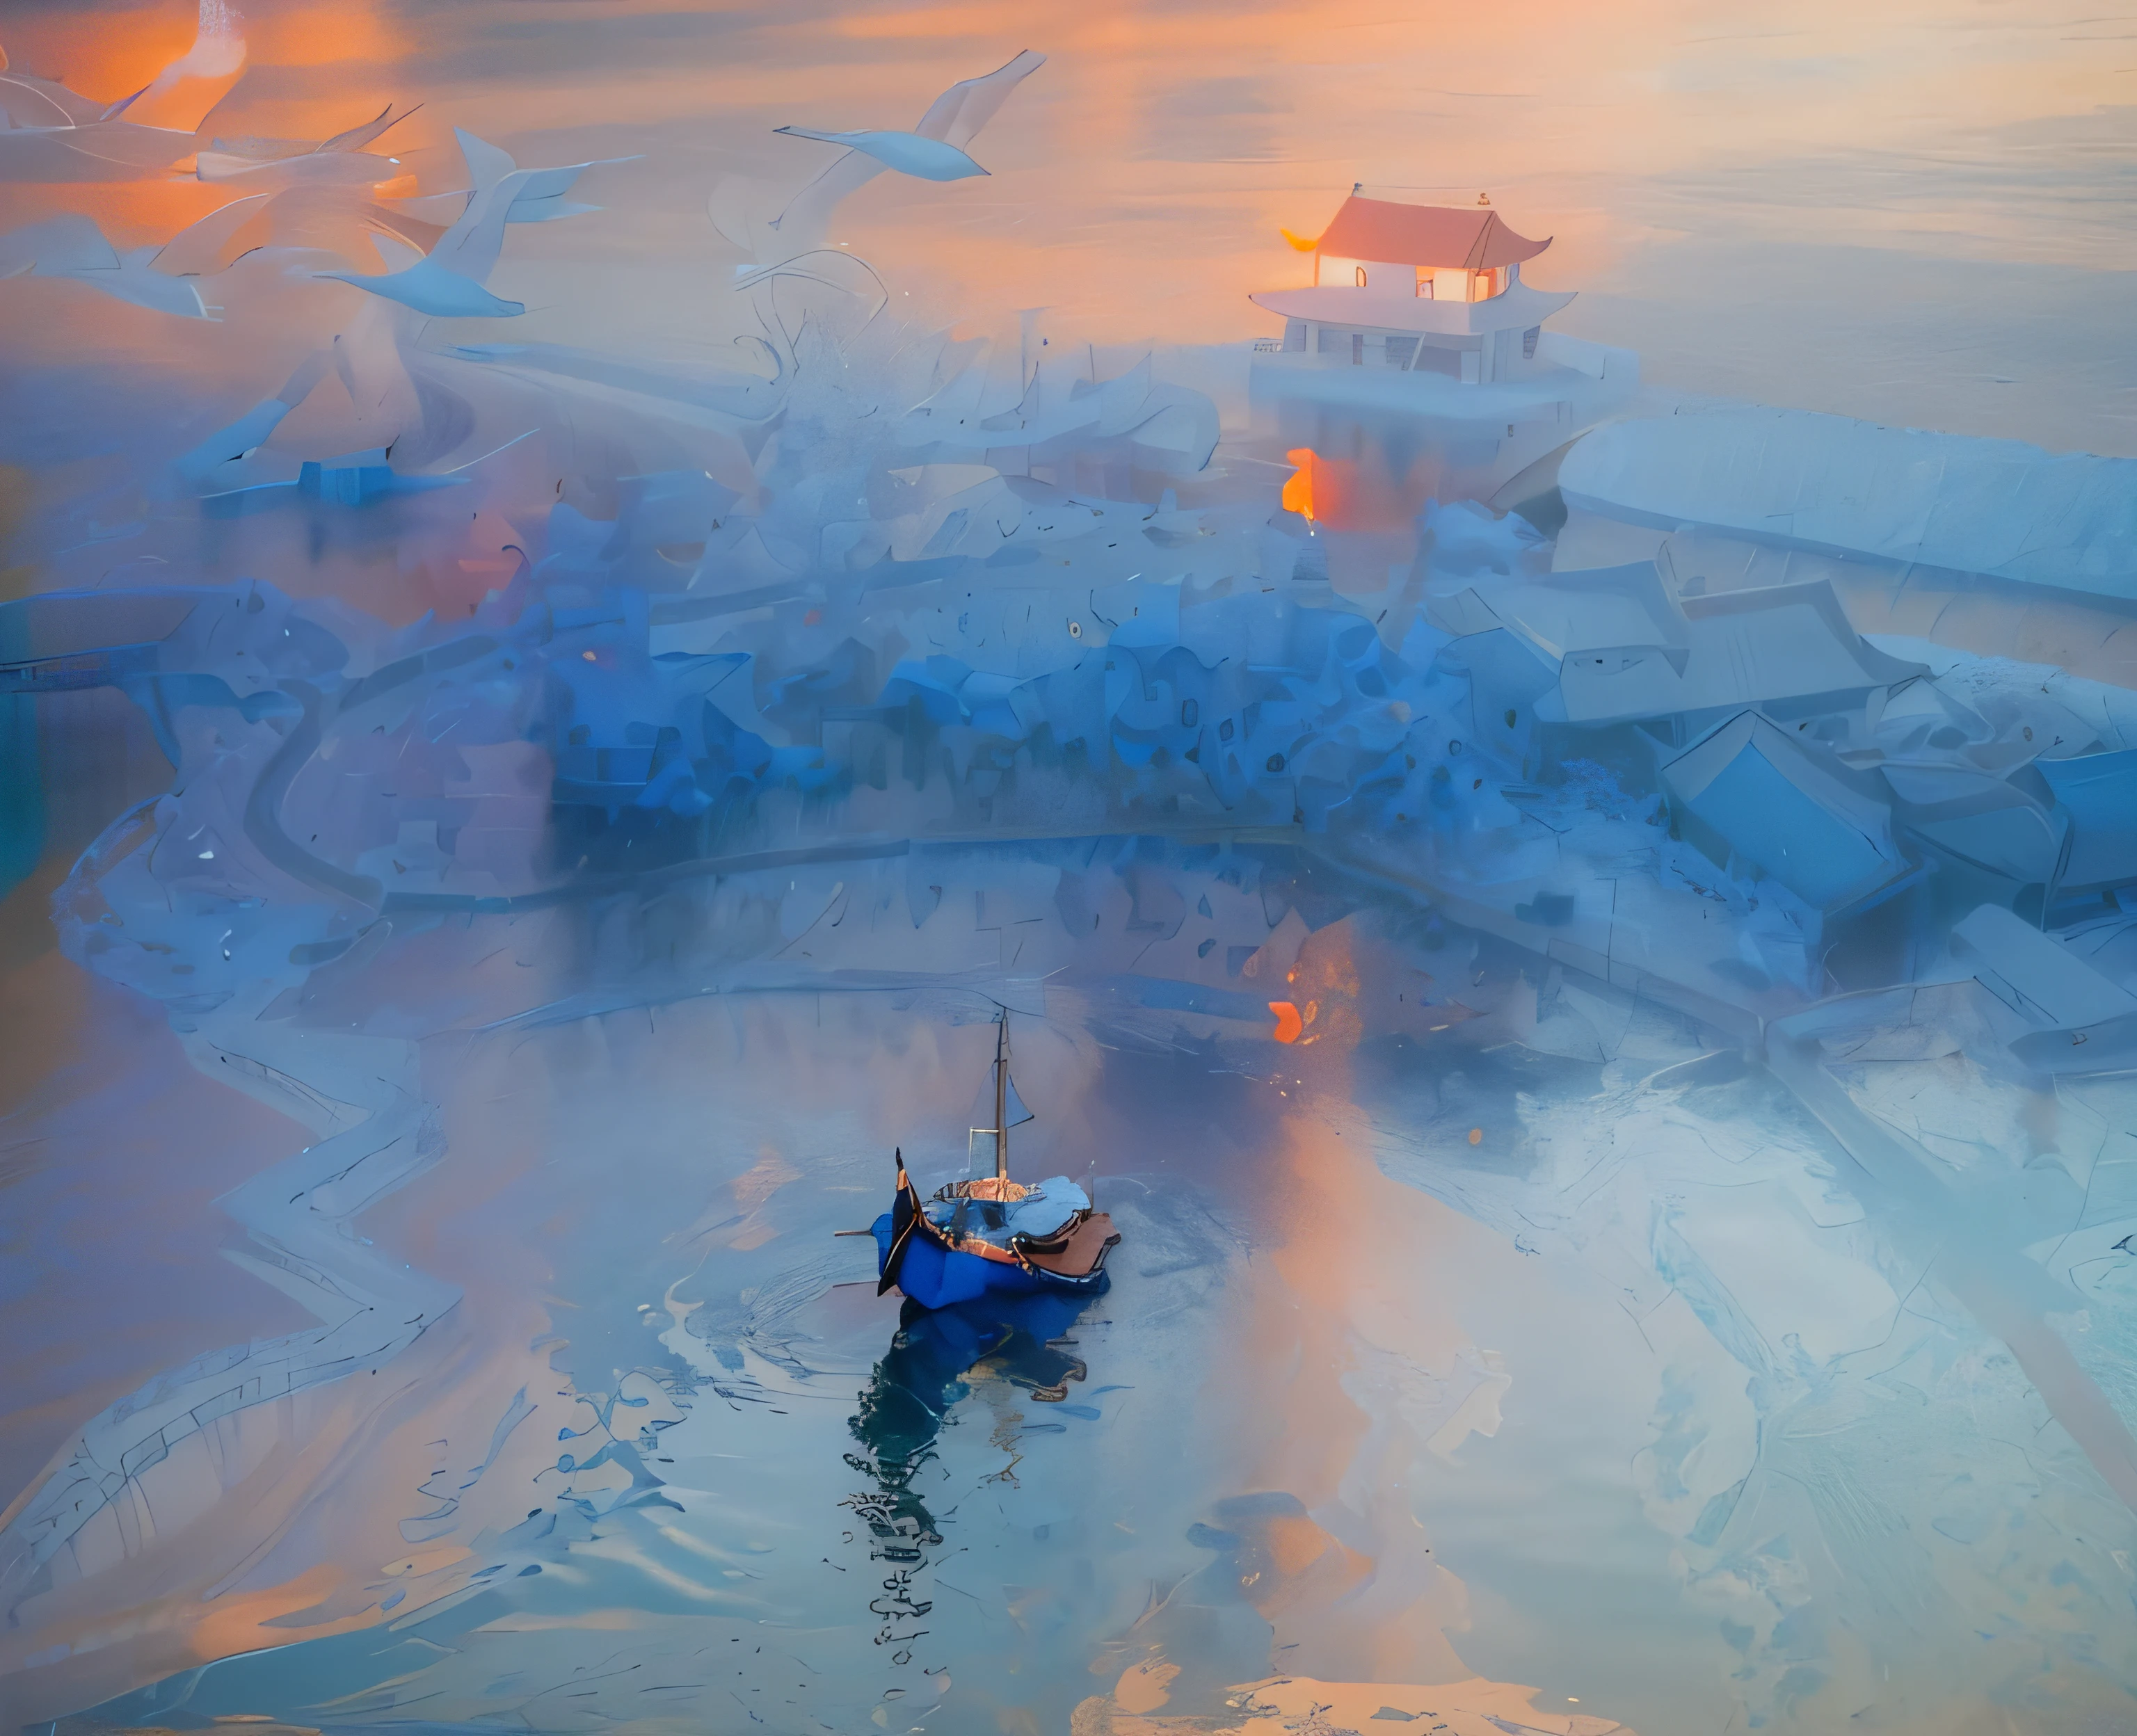 Long exposure photography，Award-winning photography，Practical，In waters with boats，Sunset, ，stunning lighting, Abstract， Claude Monet，Abstract，photography，high quality，blue，orange，Sunset，Beautiful scenery，photo，photoPractical